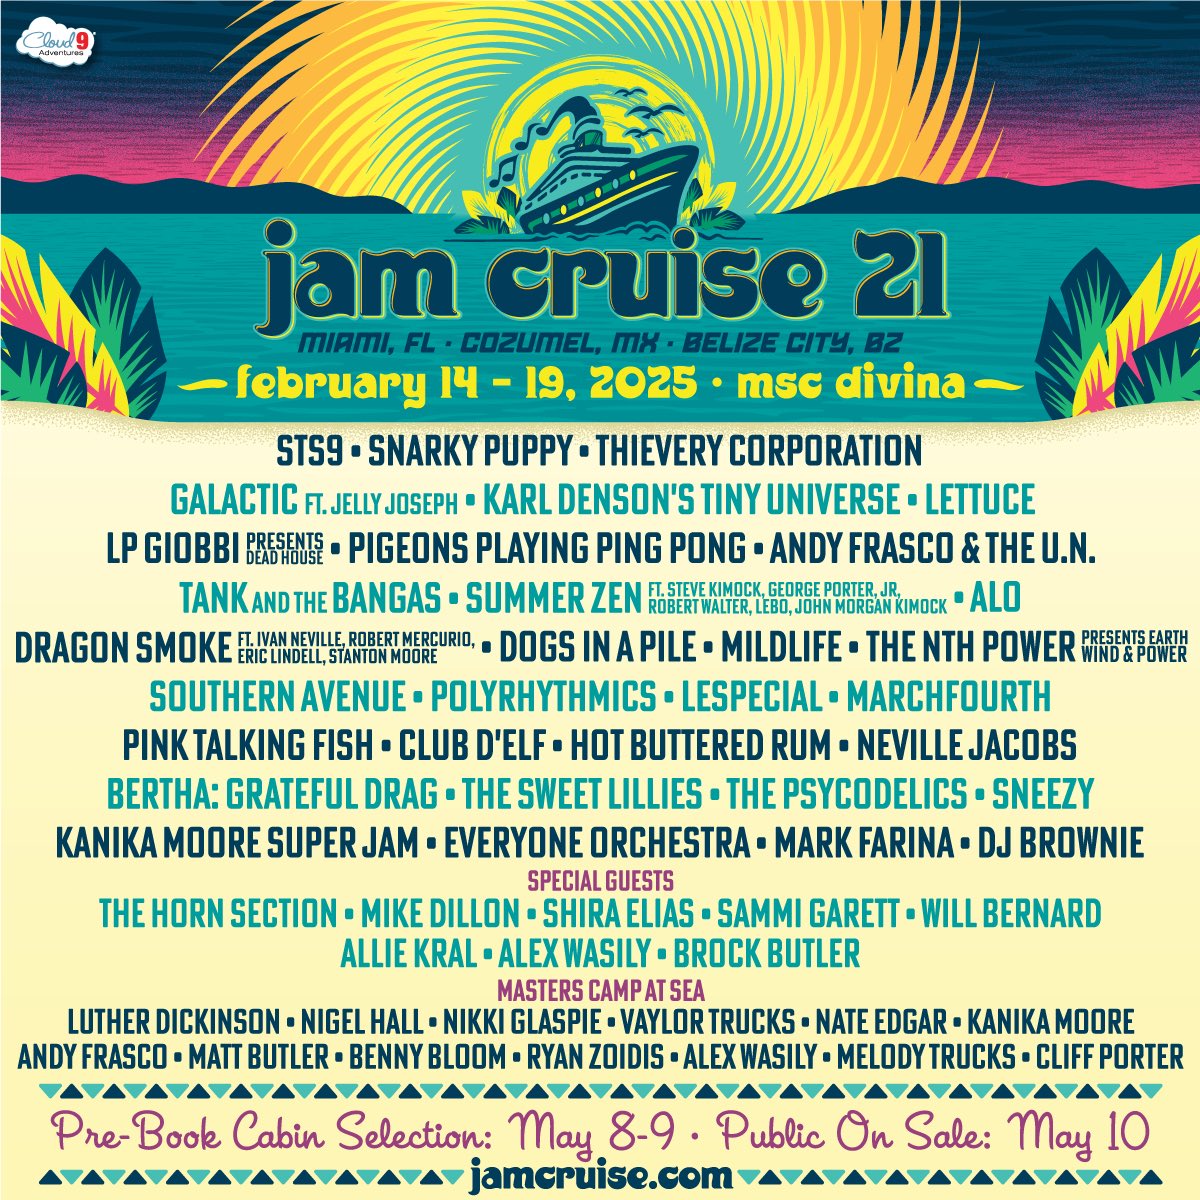 Sail On! Stoked to get back on the boat February 14-19, 2025 for @jamcruise 🚢 Join us and a stacked lineup for one of the best parties on planet earth 🌍 Pre-book Cabin Selection May 8-9 • Public On Sale May 10 @ 1pm ET 🎟 >>> pigeonsplayingpingpong.com/tour-dates